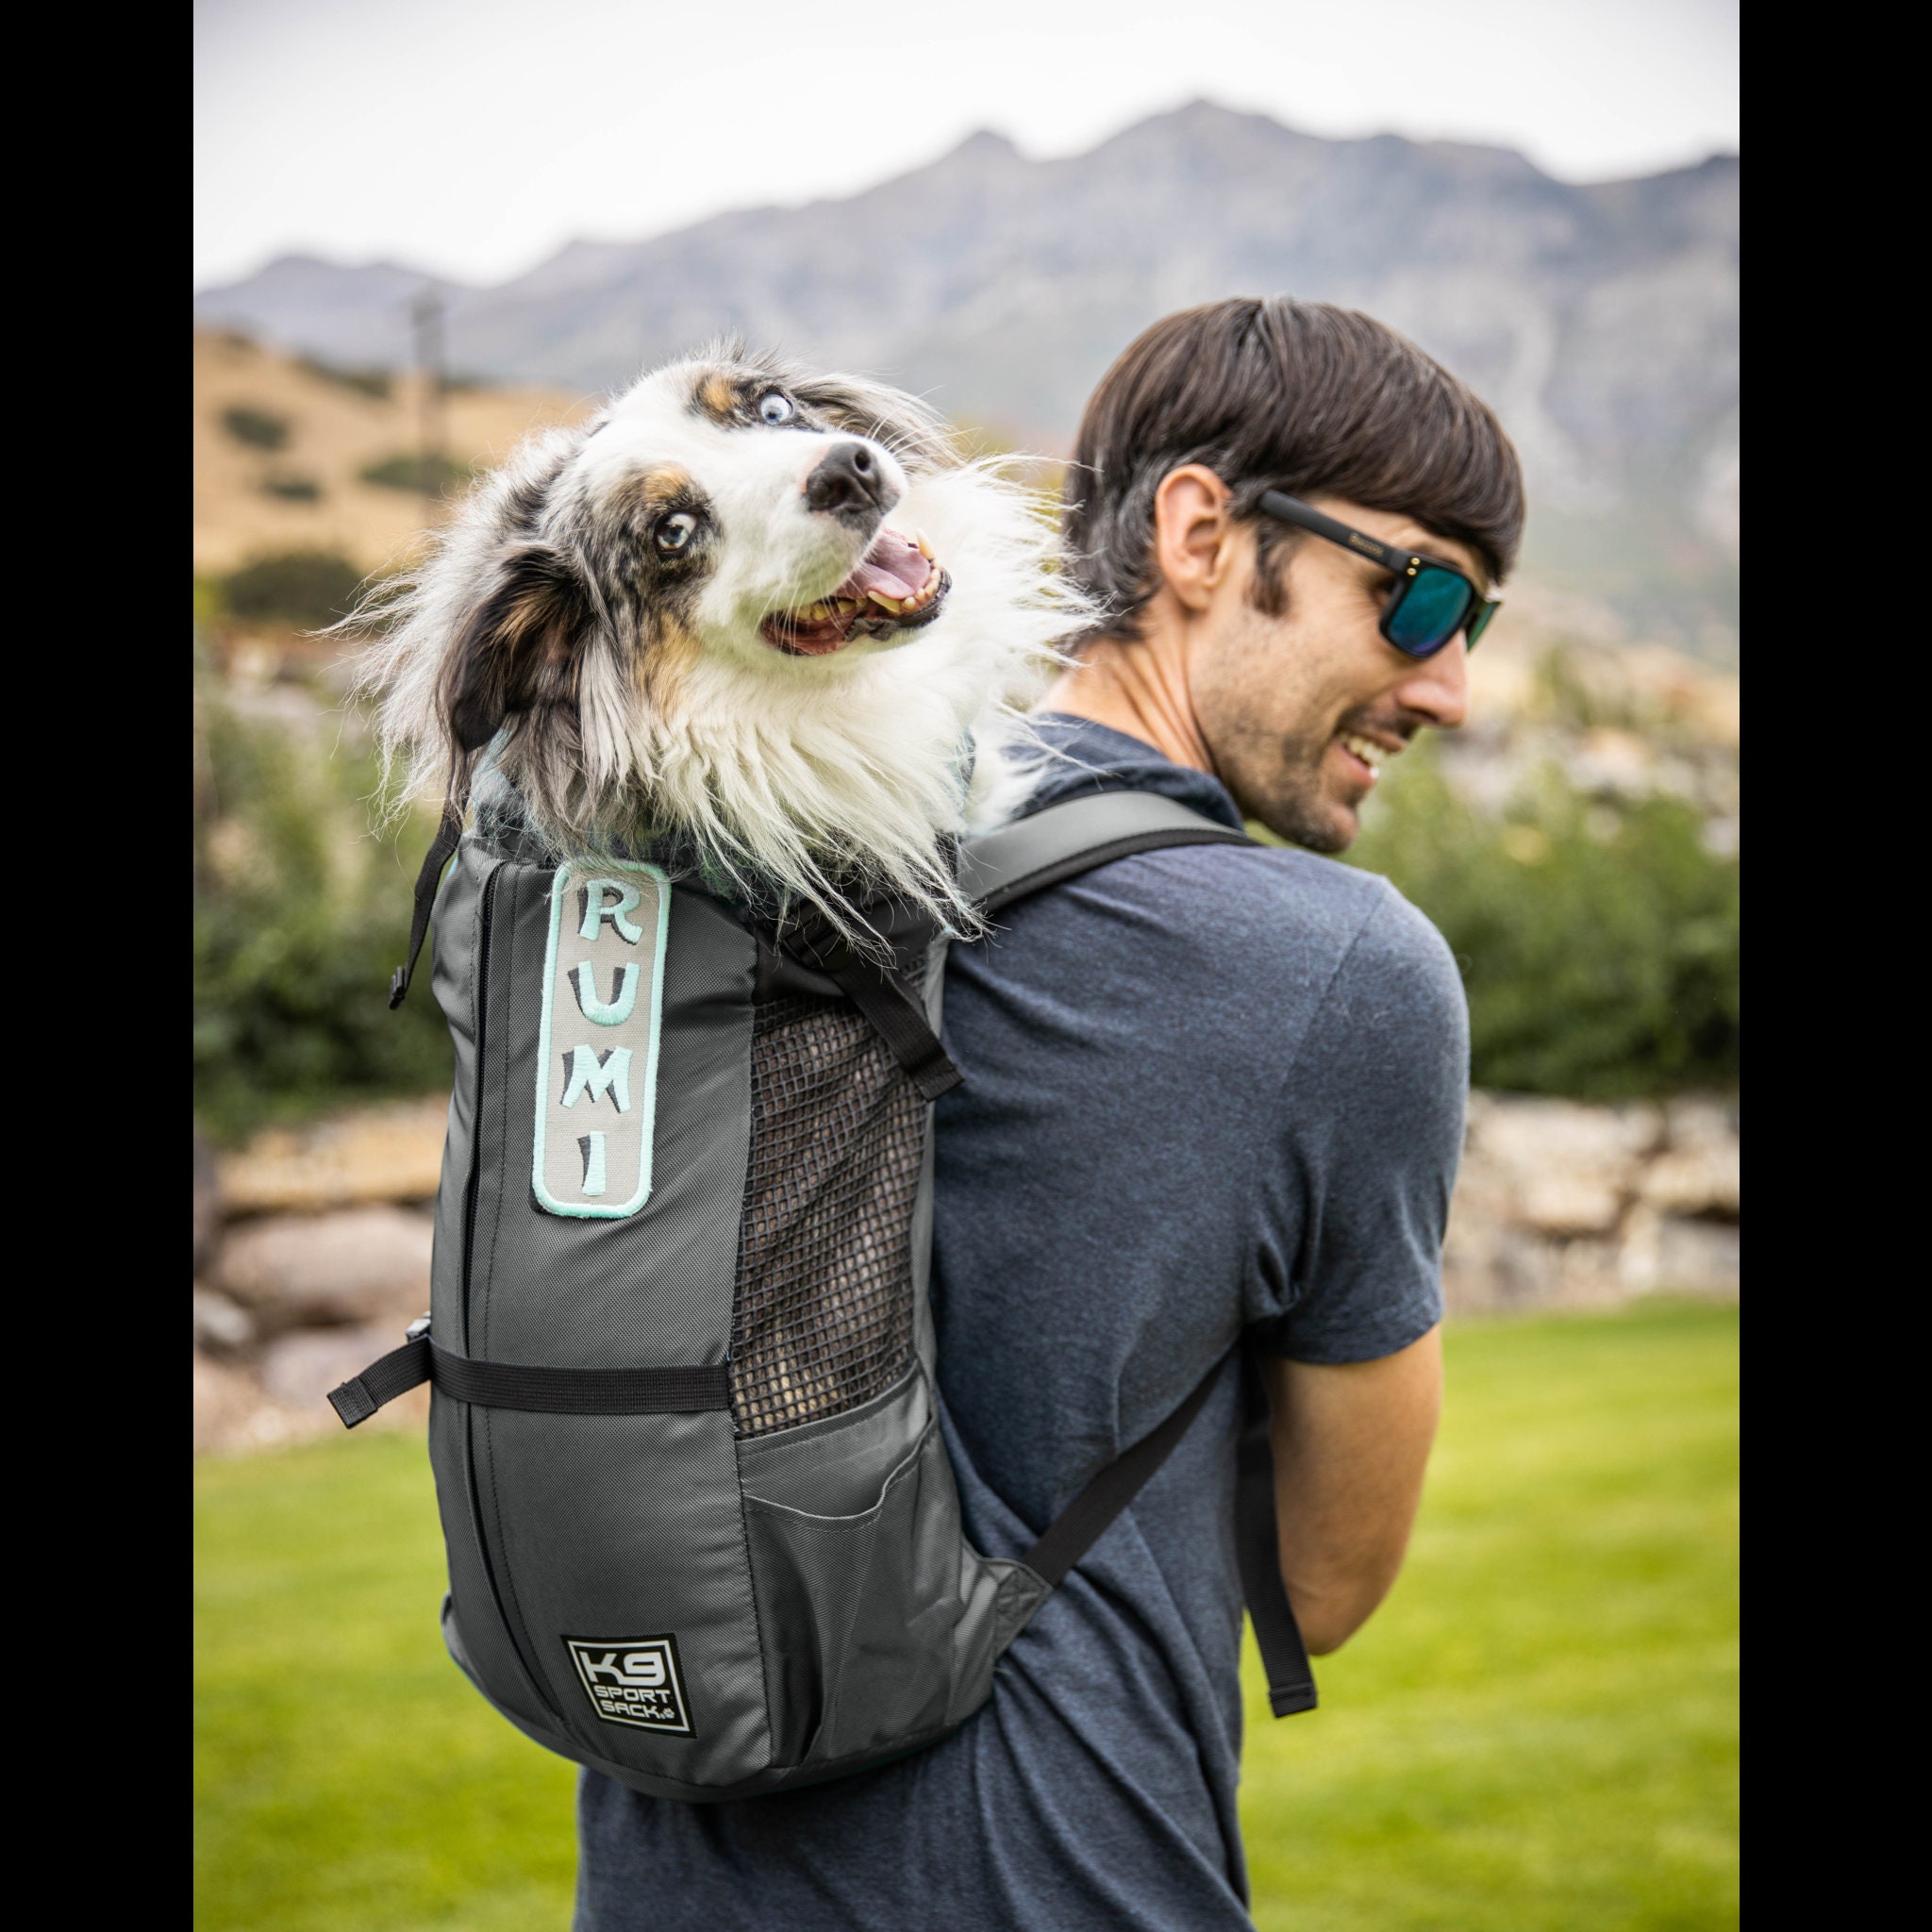 STALLION DOG PERCH BACKPACK (Up to 30 lbs), Made in USA